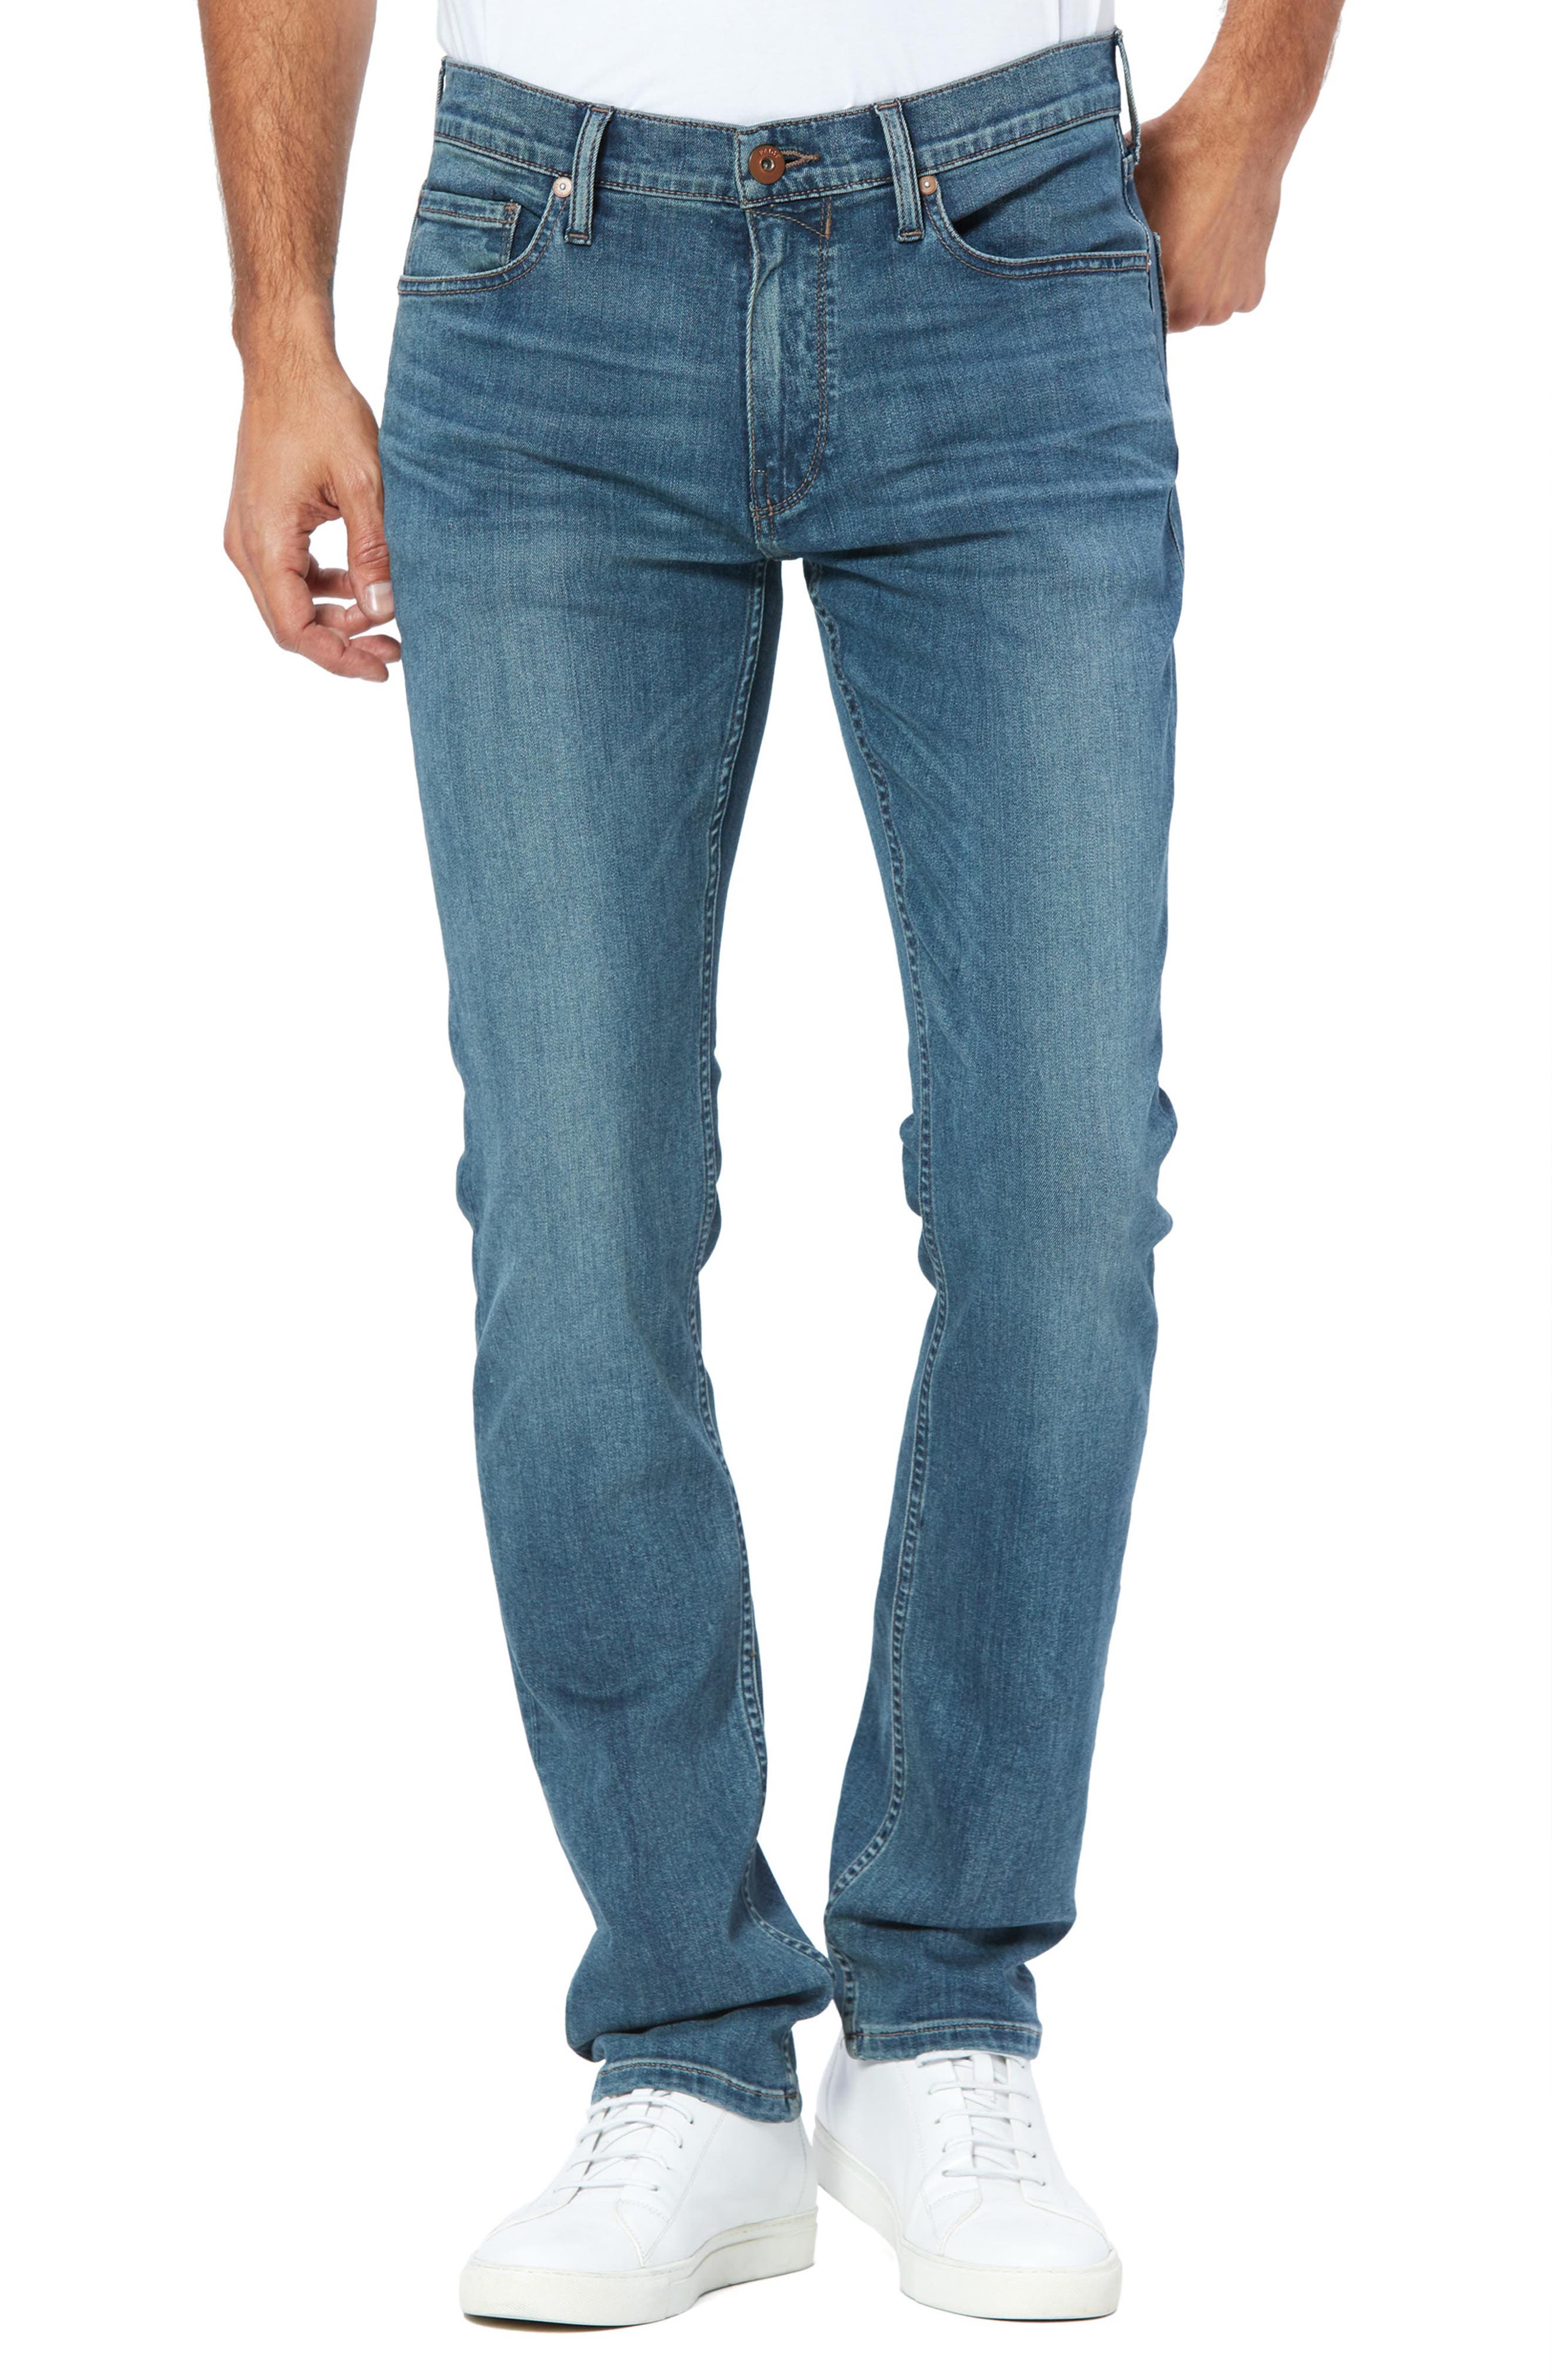 mens jeans tall sizes